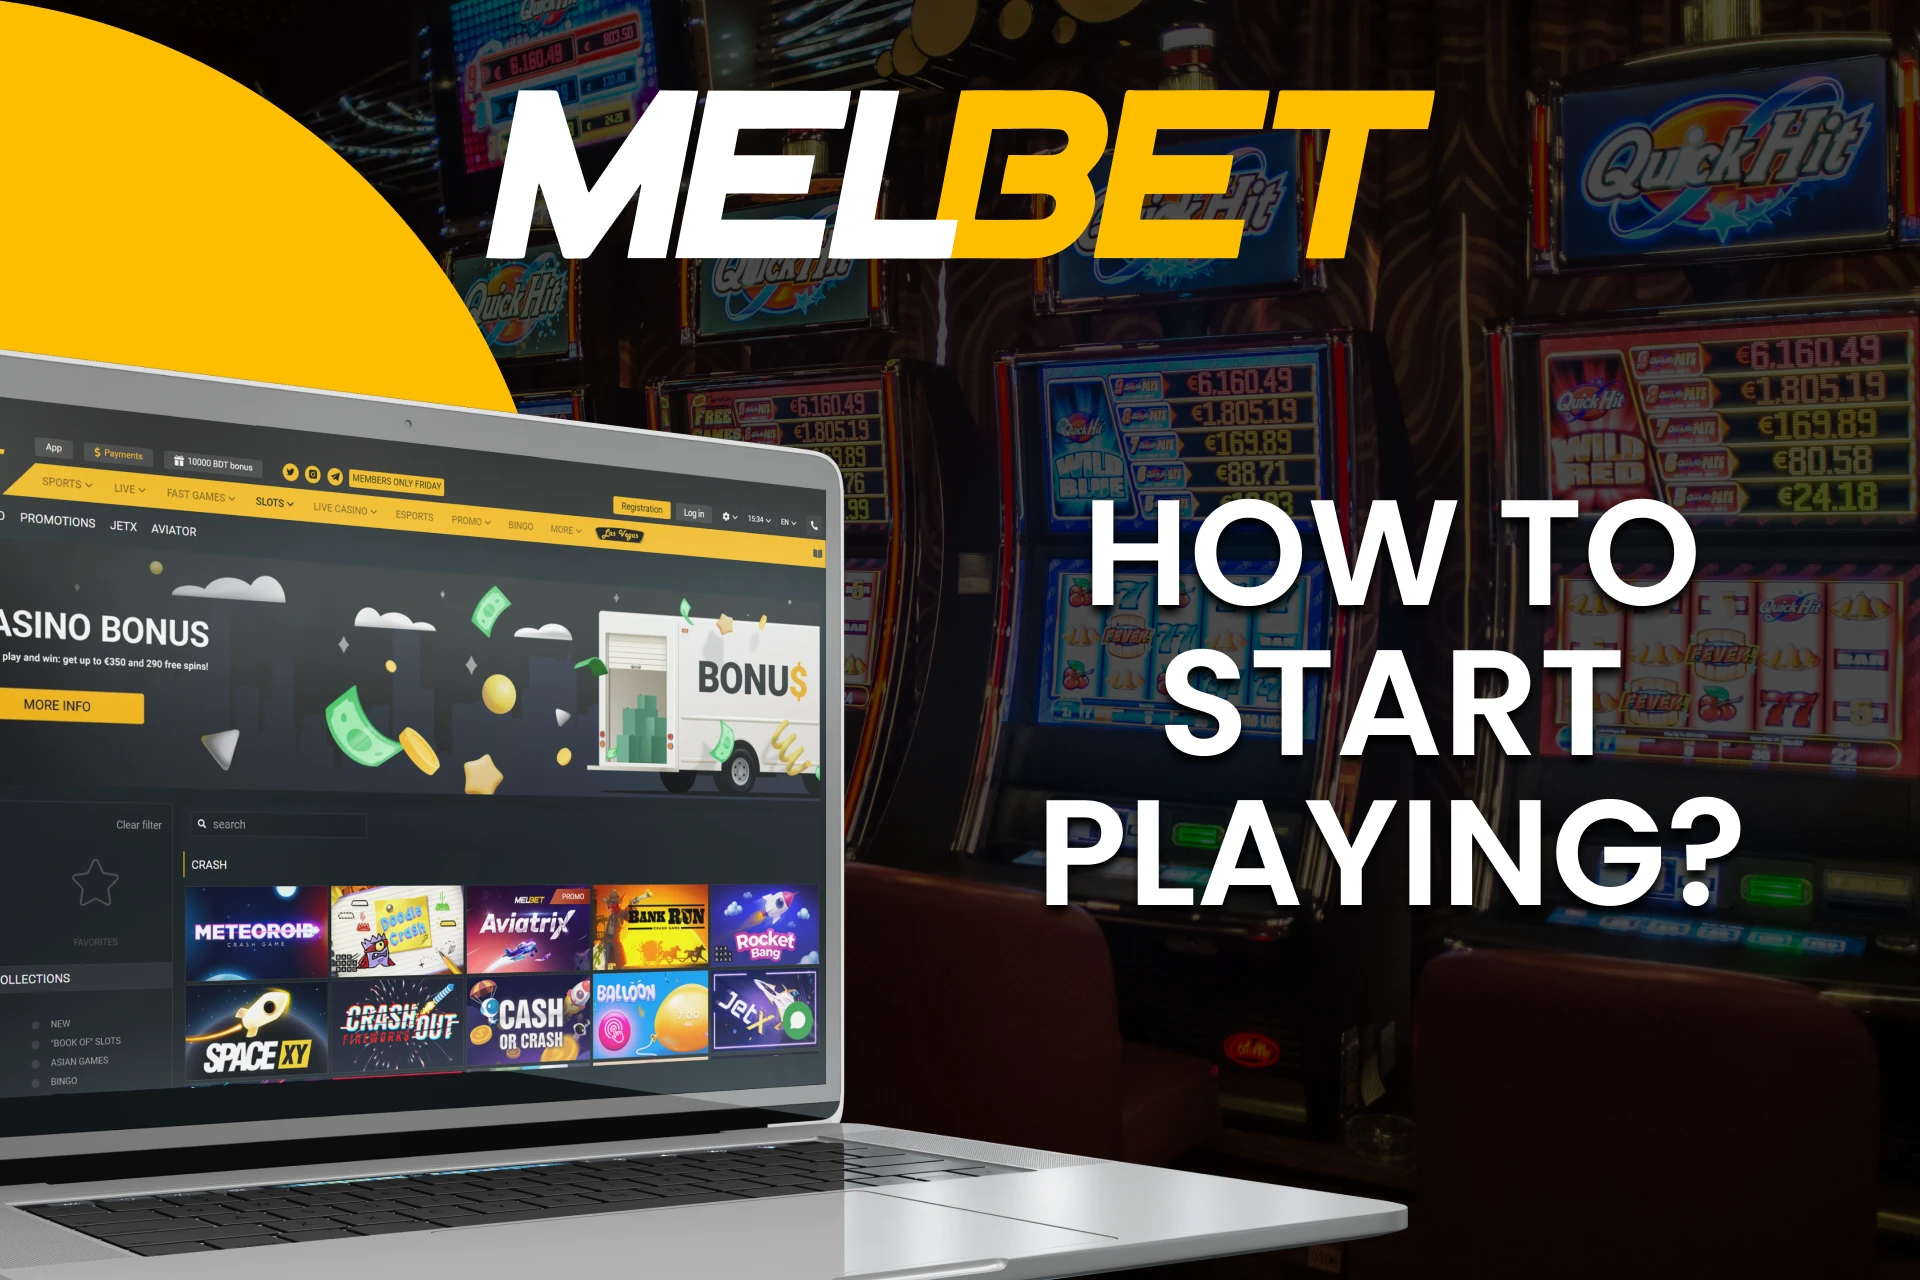 Go to the desired Melbet section for games.